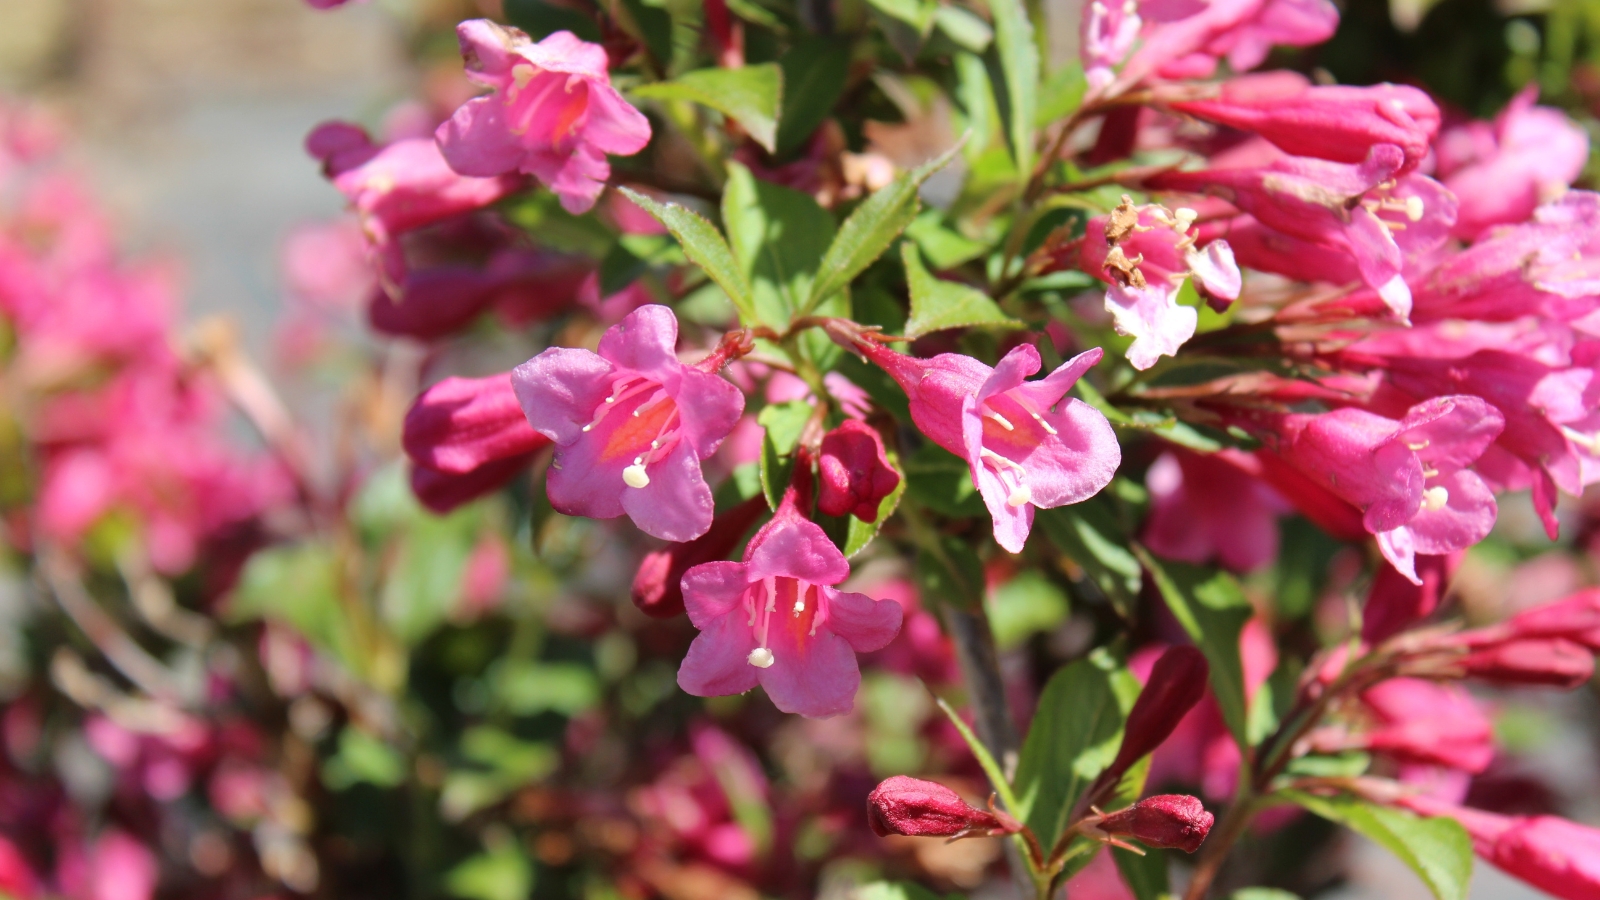 Sunlight illuminates pink 'Minuet' weigela flowers, their delicate petals unfurling gracefully, basking in the warmth of the day, a vibrant display of nature's beauty captured in a single moment.